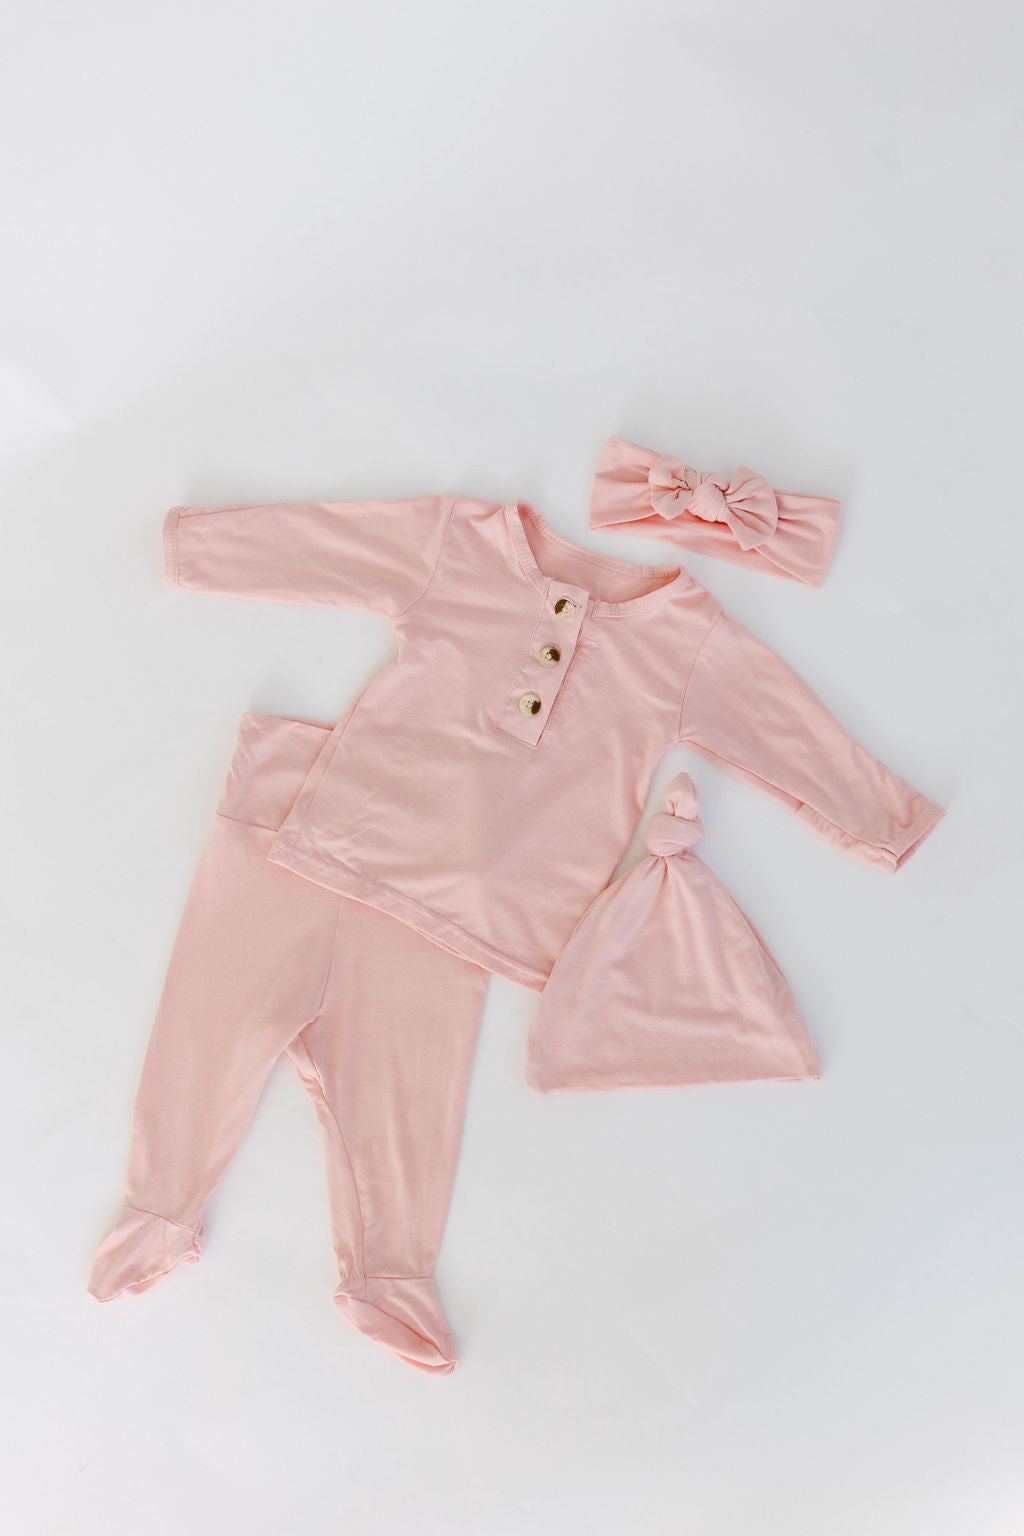 Top and Bottom Outfit, Hat and Headband Set (Newborn - 12 months) - Pink